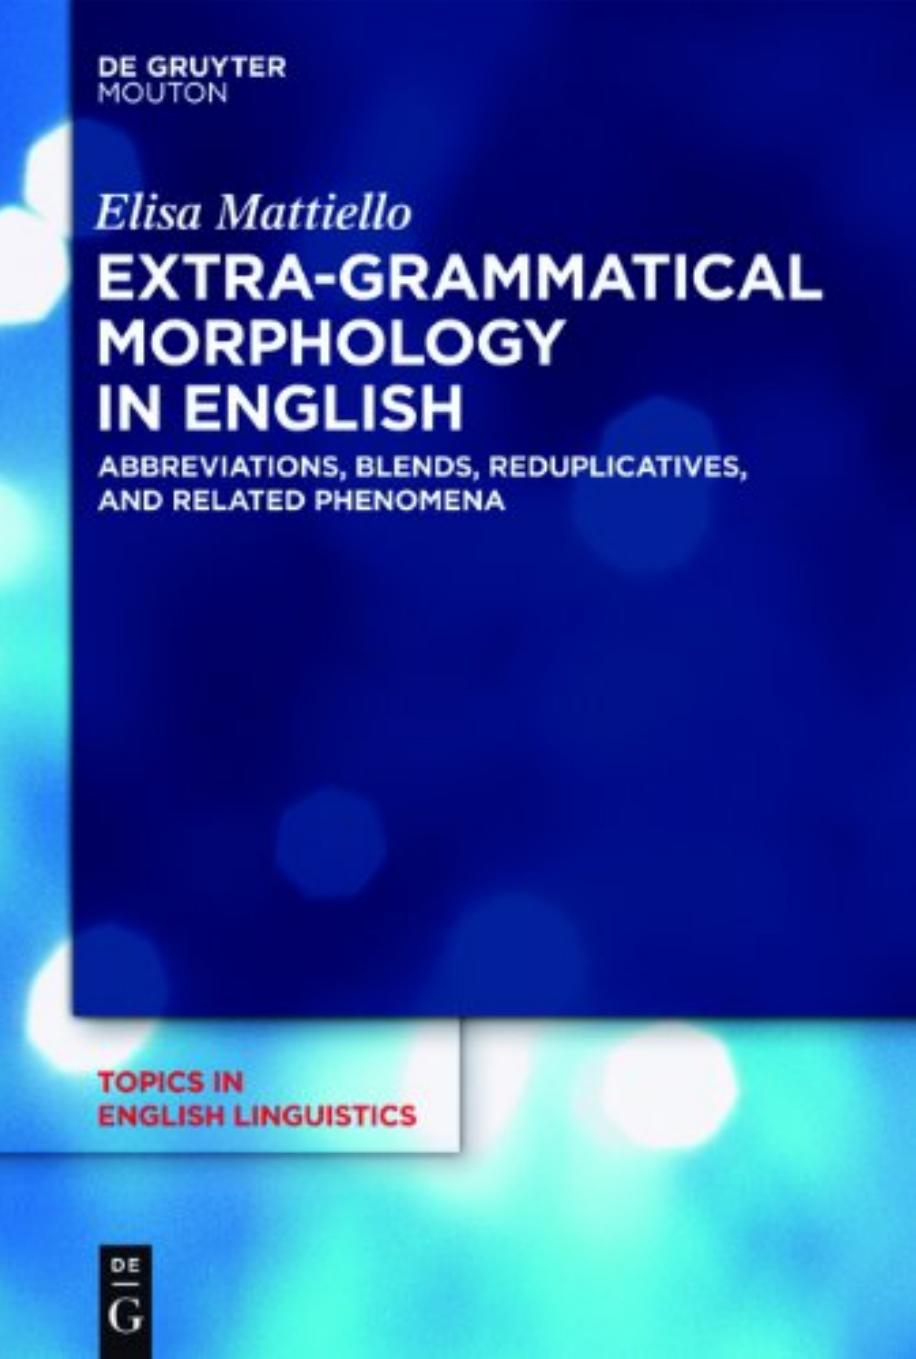 Extra-Grammatical Morphology in English: Abbreviations, Blends, Reduplicatives, and Related Phenomena